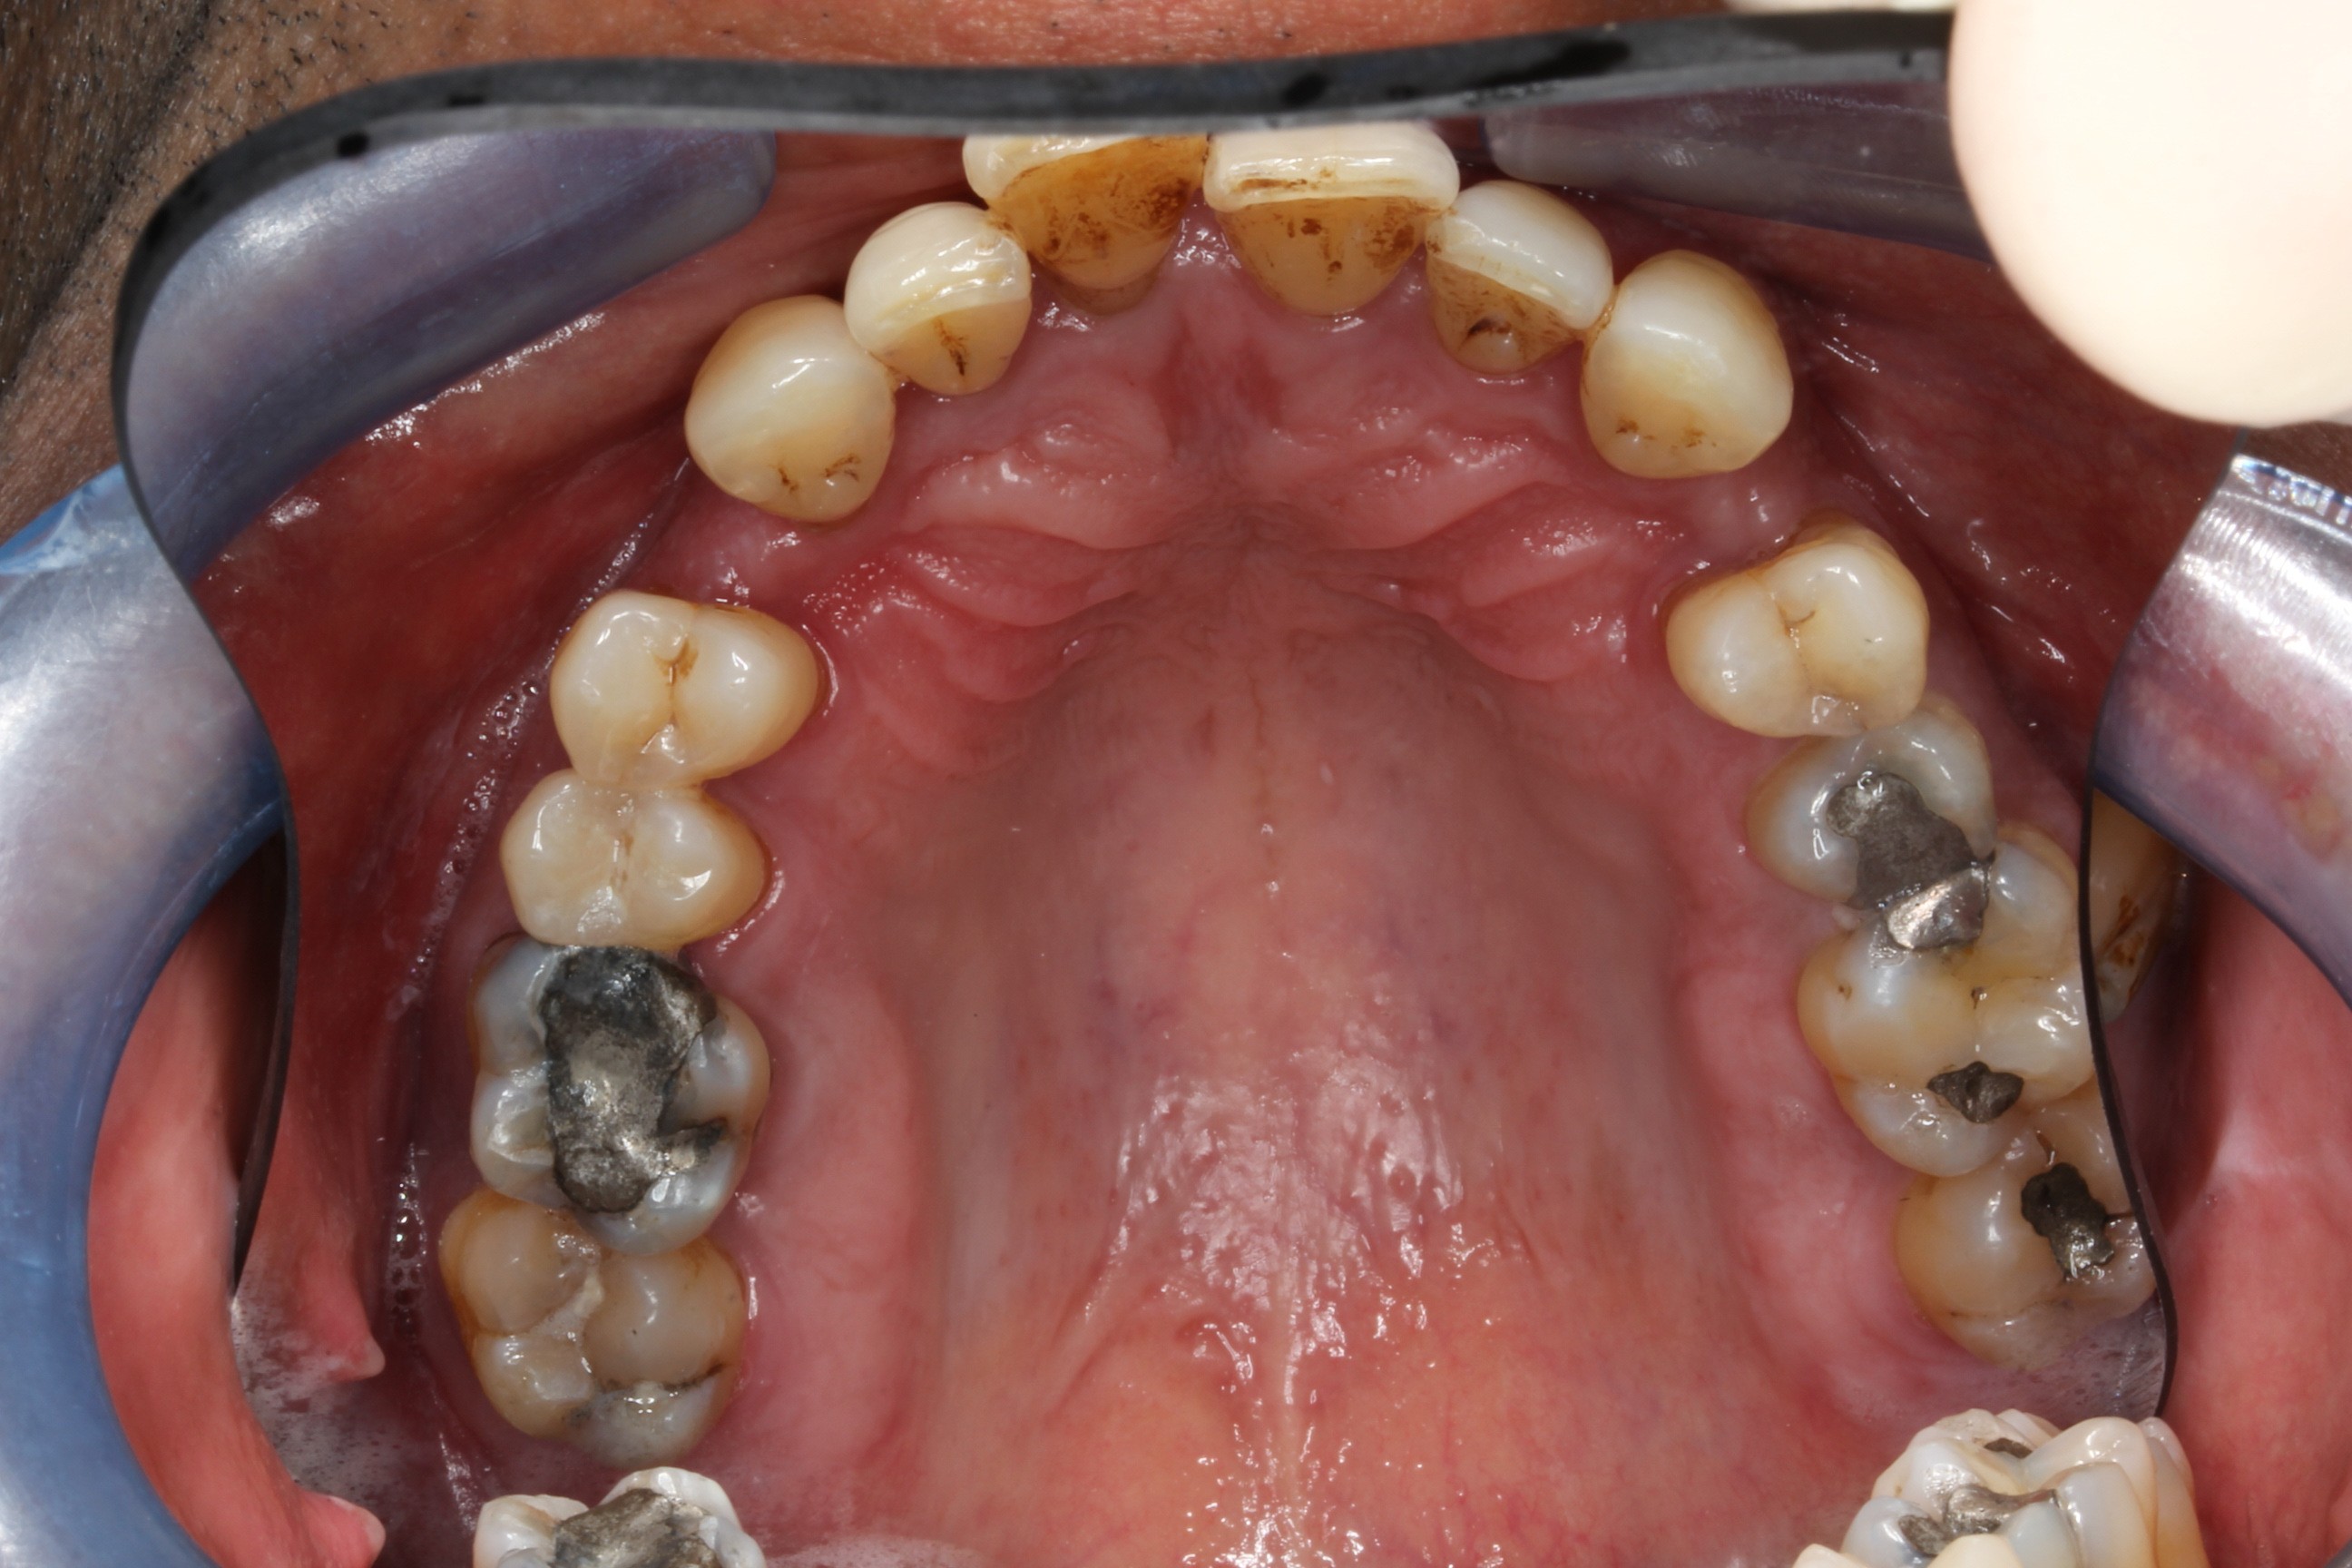 patient presented with tooth caused by sinus infection upper arch